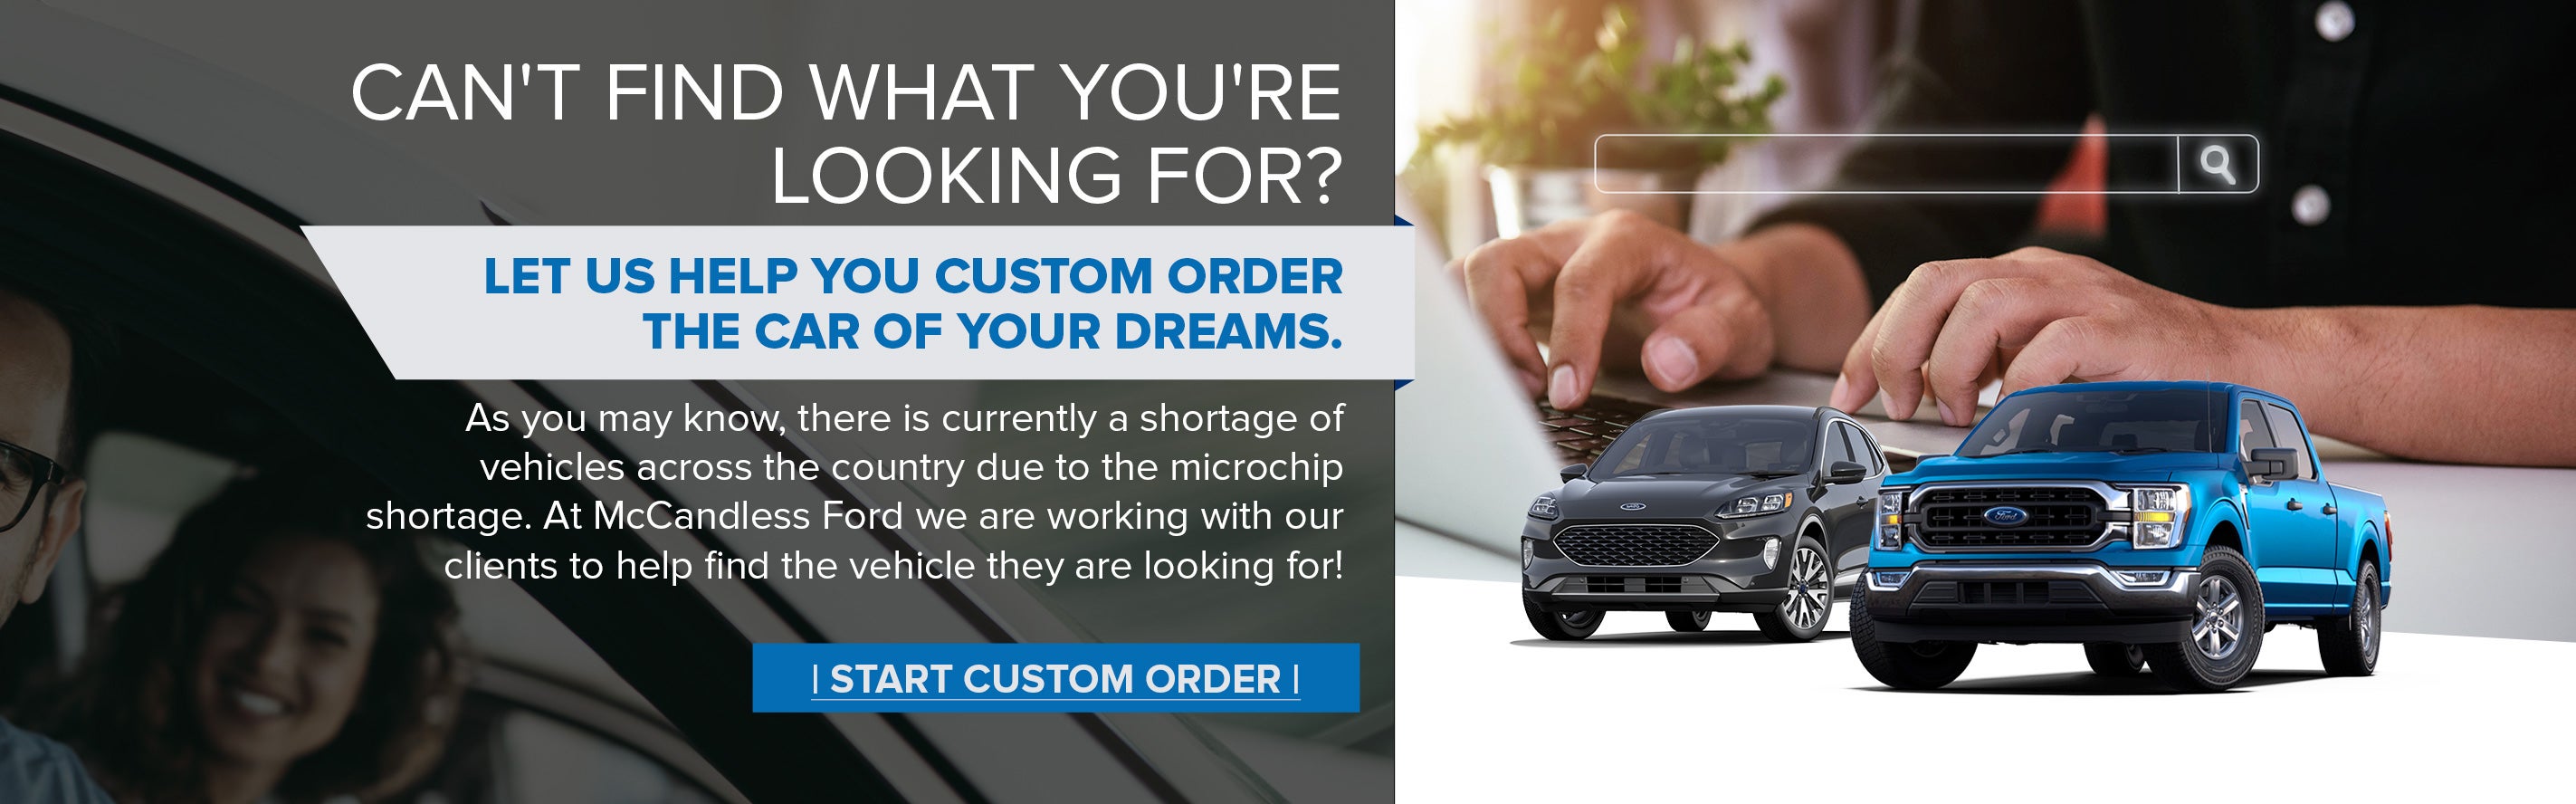 Customize Your Order Today! 